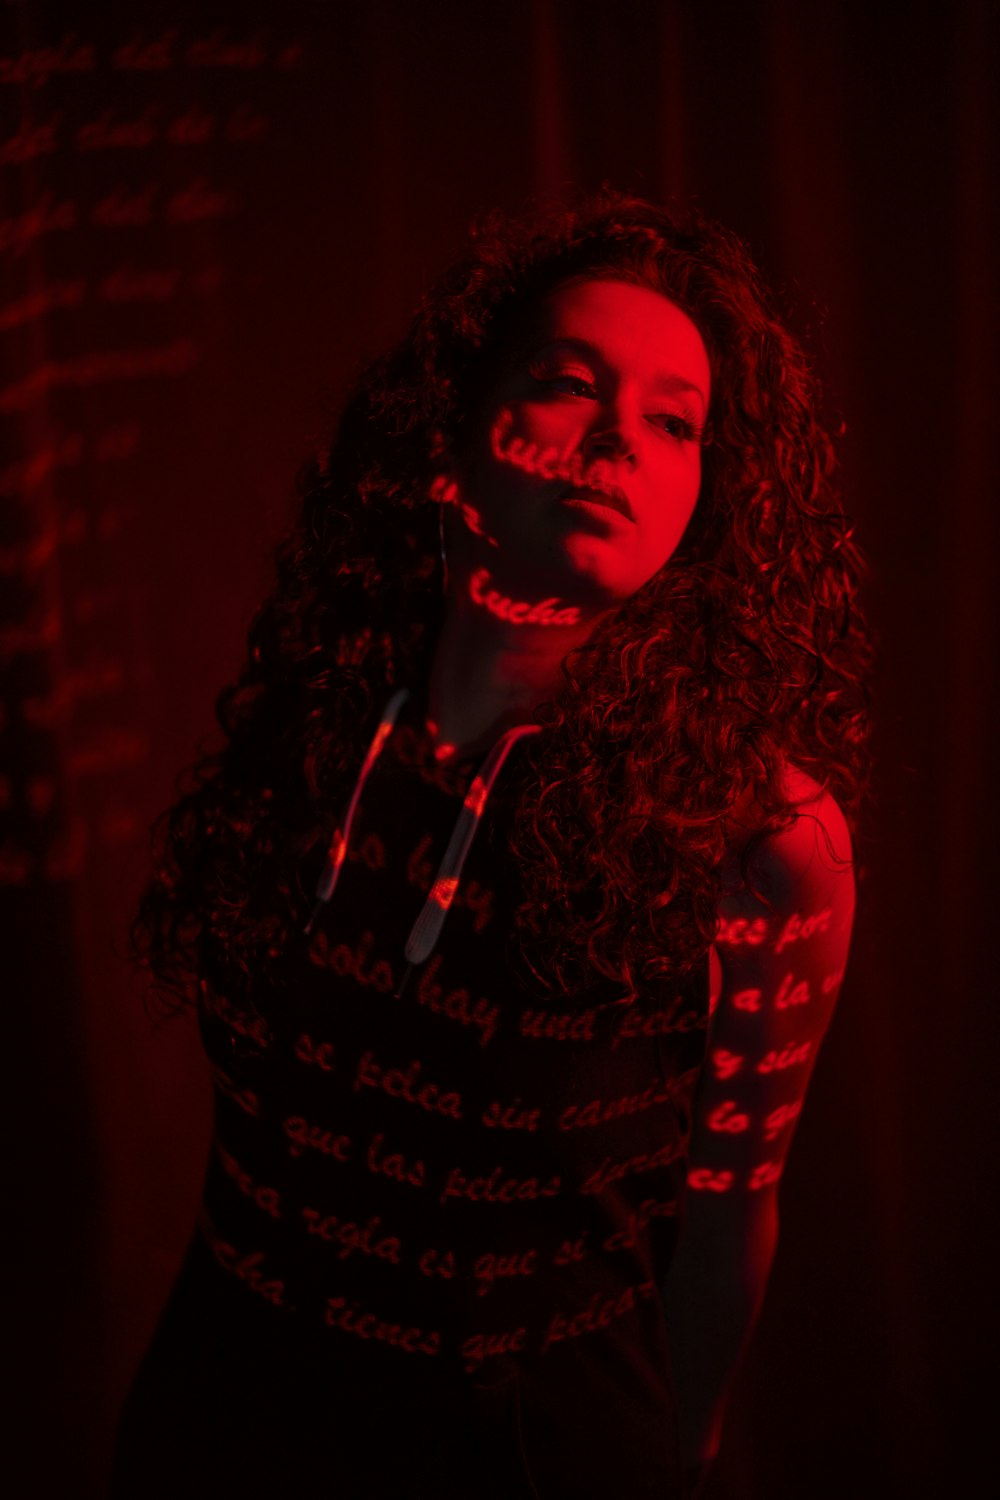 a woman with long curly hair standing in a dark room